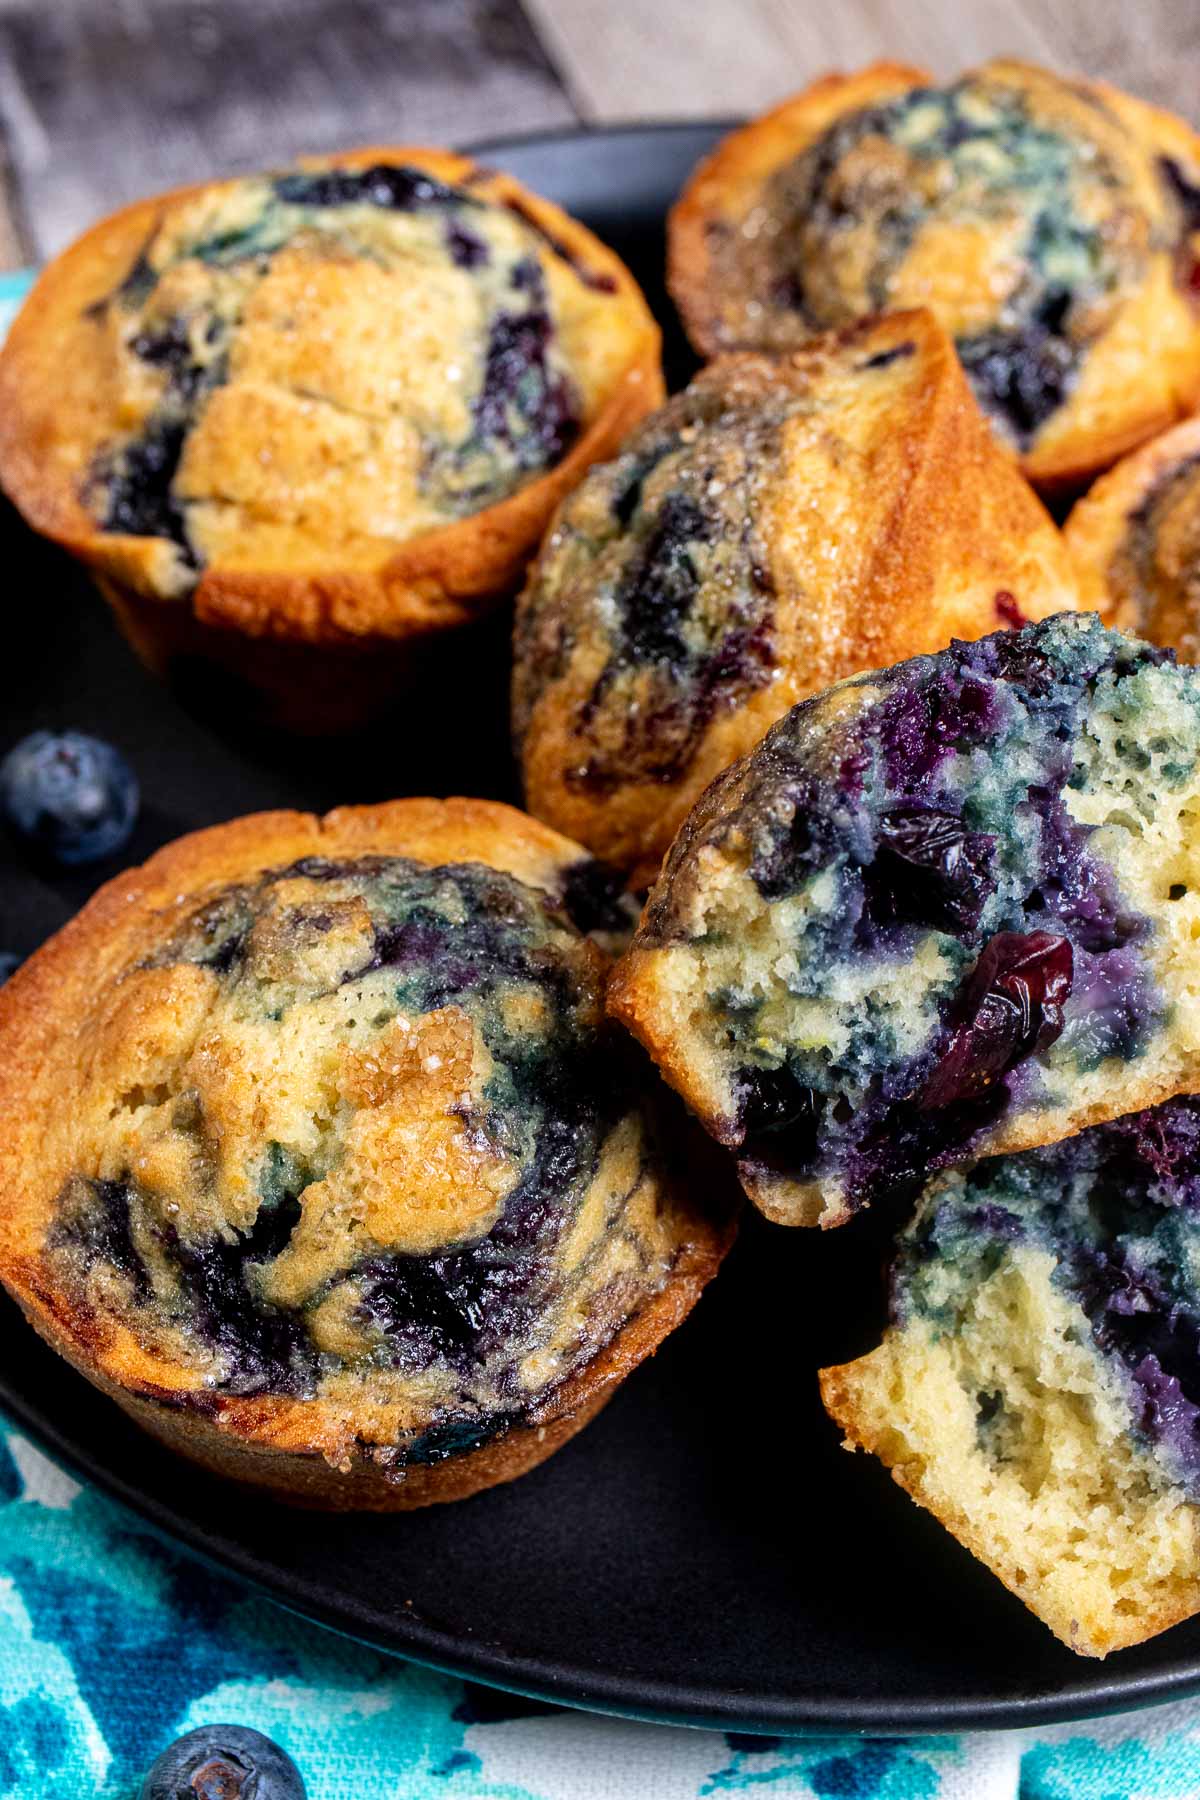 Bakery style blueberry swirl muffins on a black plate on top of a blue and white cloth. One muffin is cut open to show the swirl of blueberries inside. 